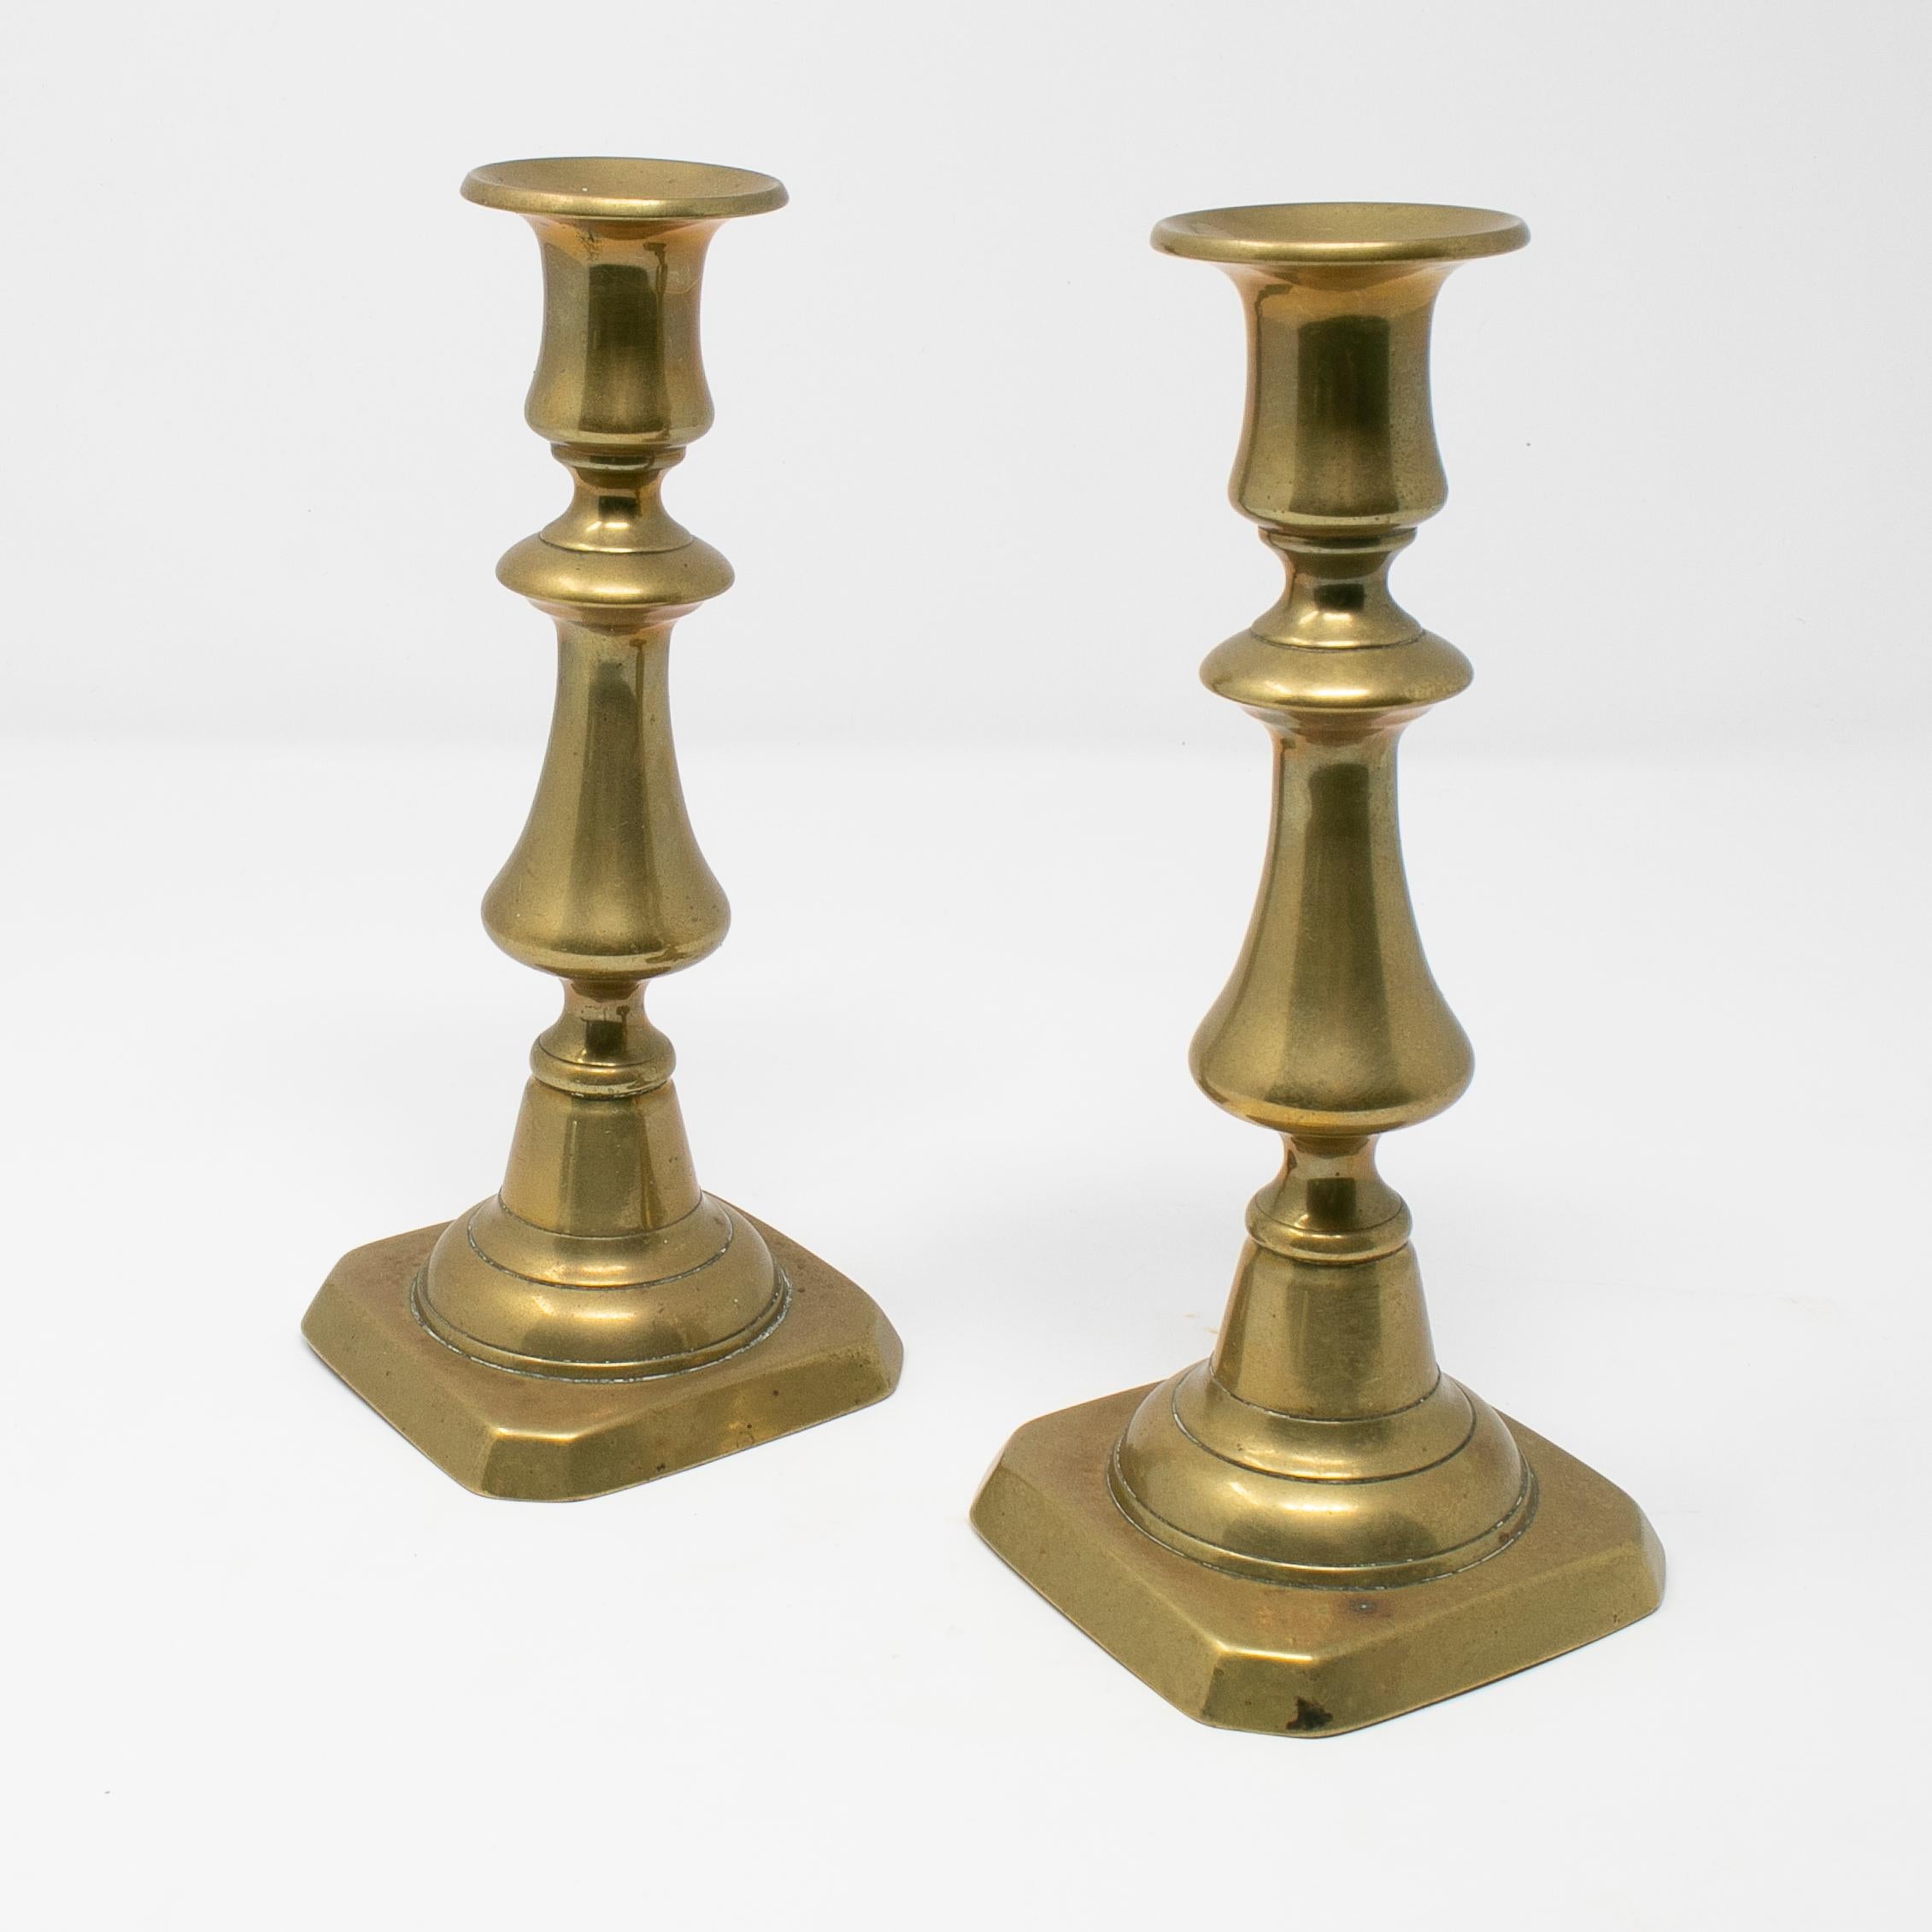 Bronze 19th Century French Pair of Candlesticks